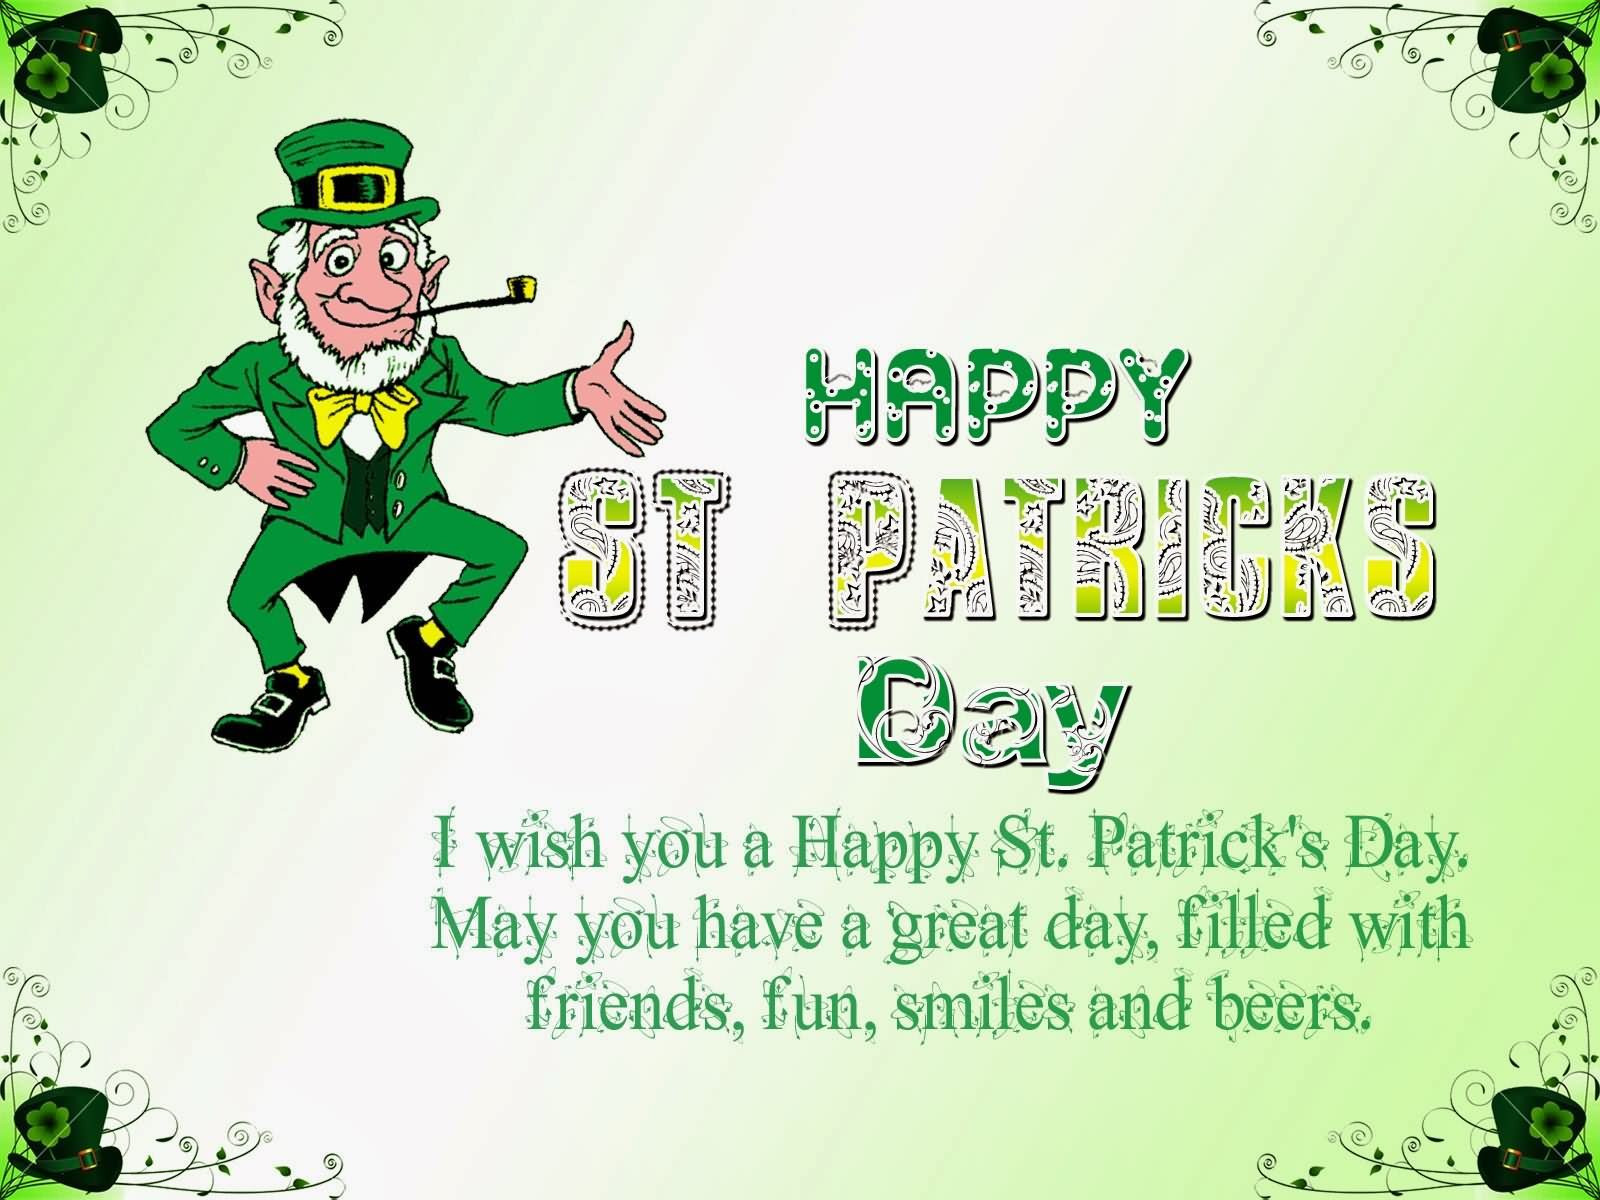 Happy St Patrick's Day Quotes
 30 Best Saint Patrick’s Day 2018 Wishes Greetings & Messages